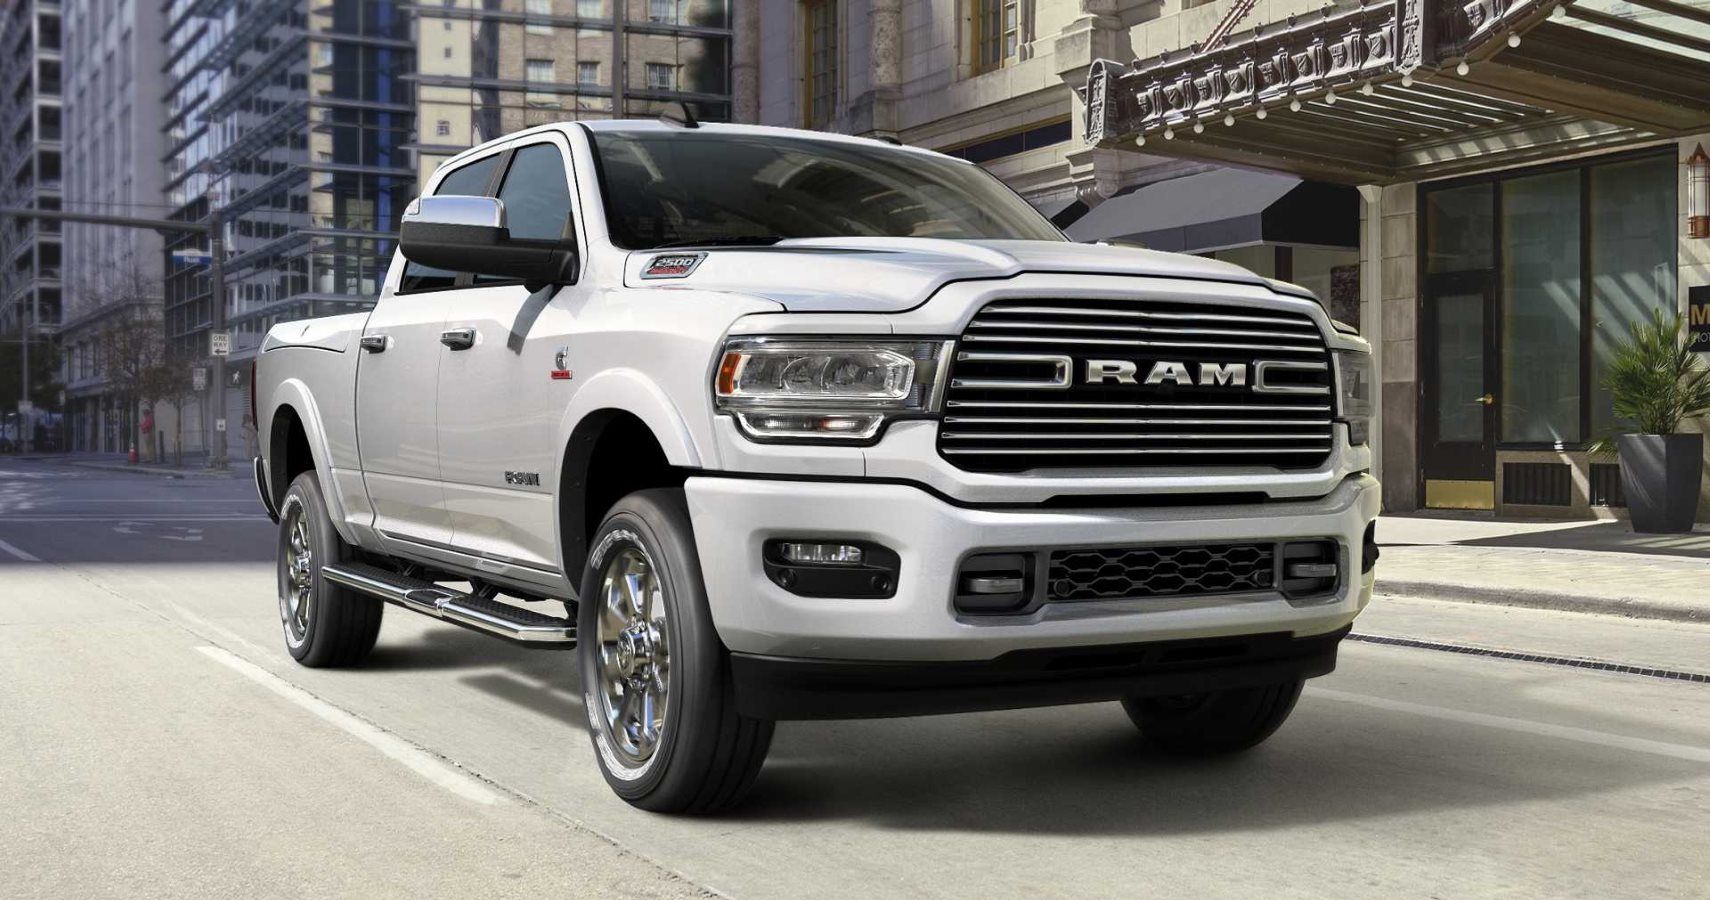 Ram Introduces Sport Pack Visual Upgrades To HD Pickups